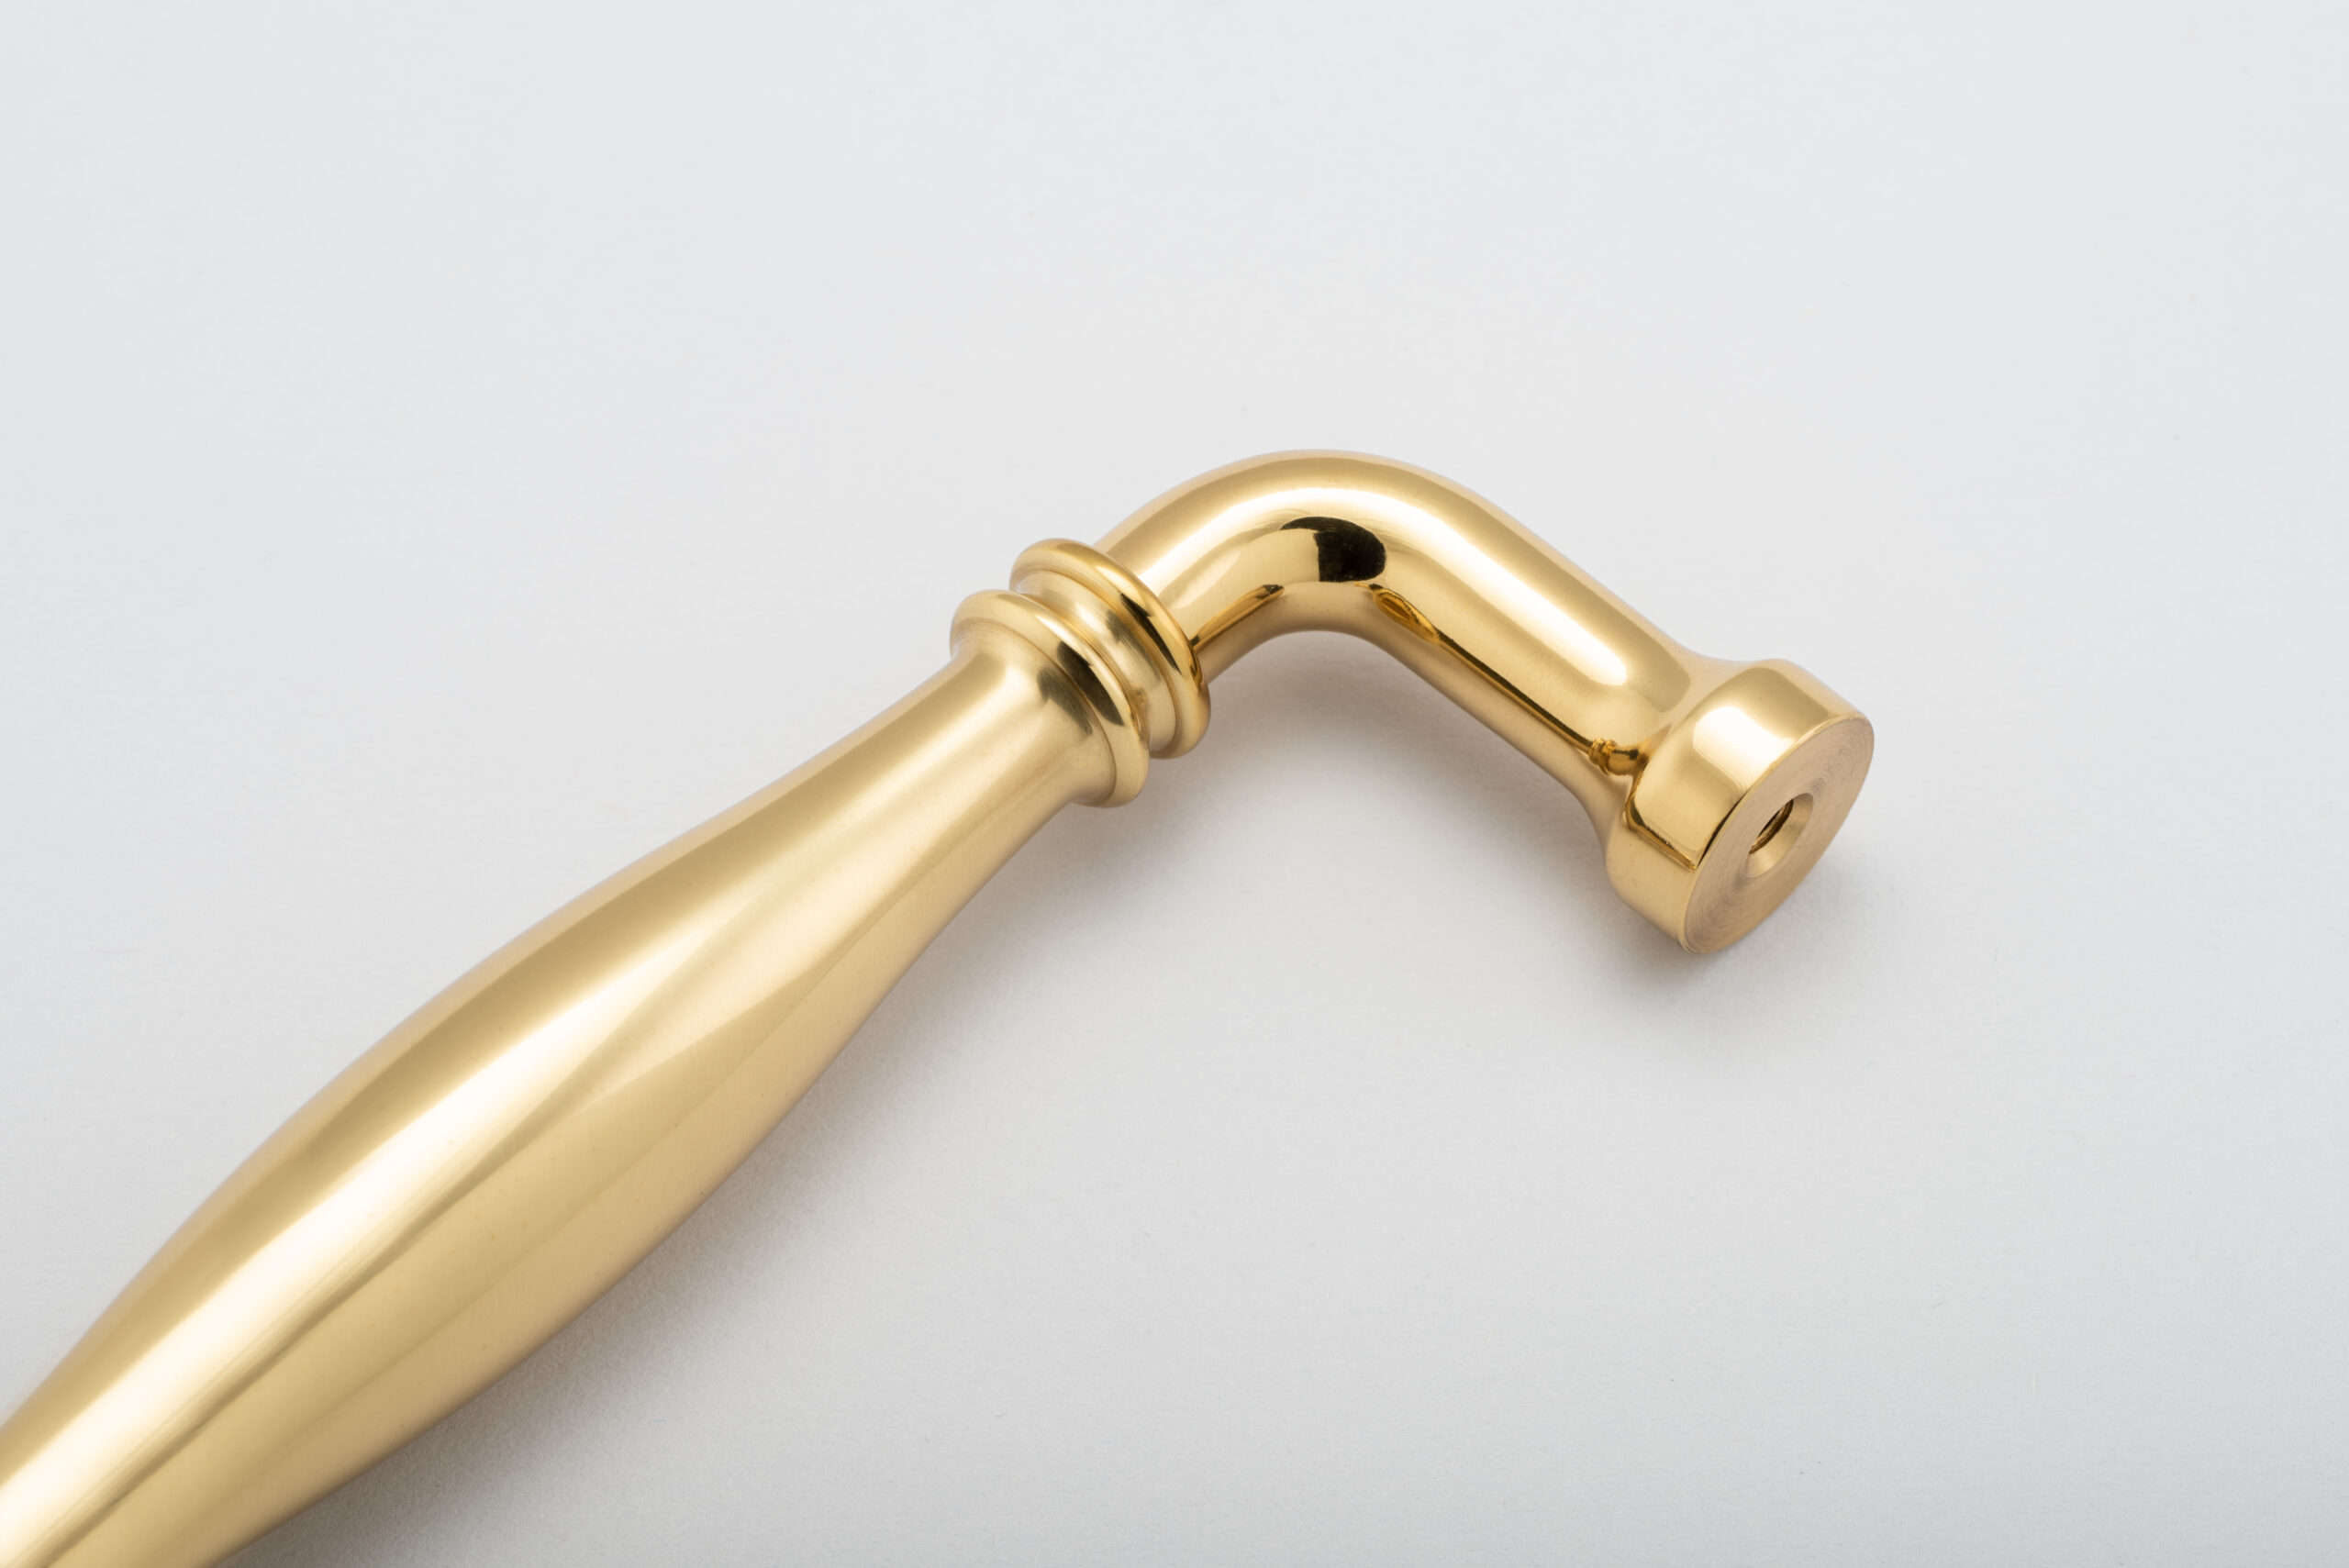 21070B - Sarlat Cabinet Pull with Backplate - CTC160mm - Polished Brass